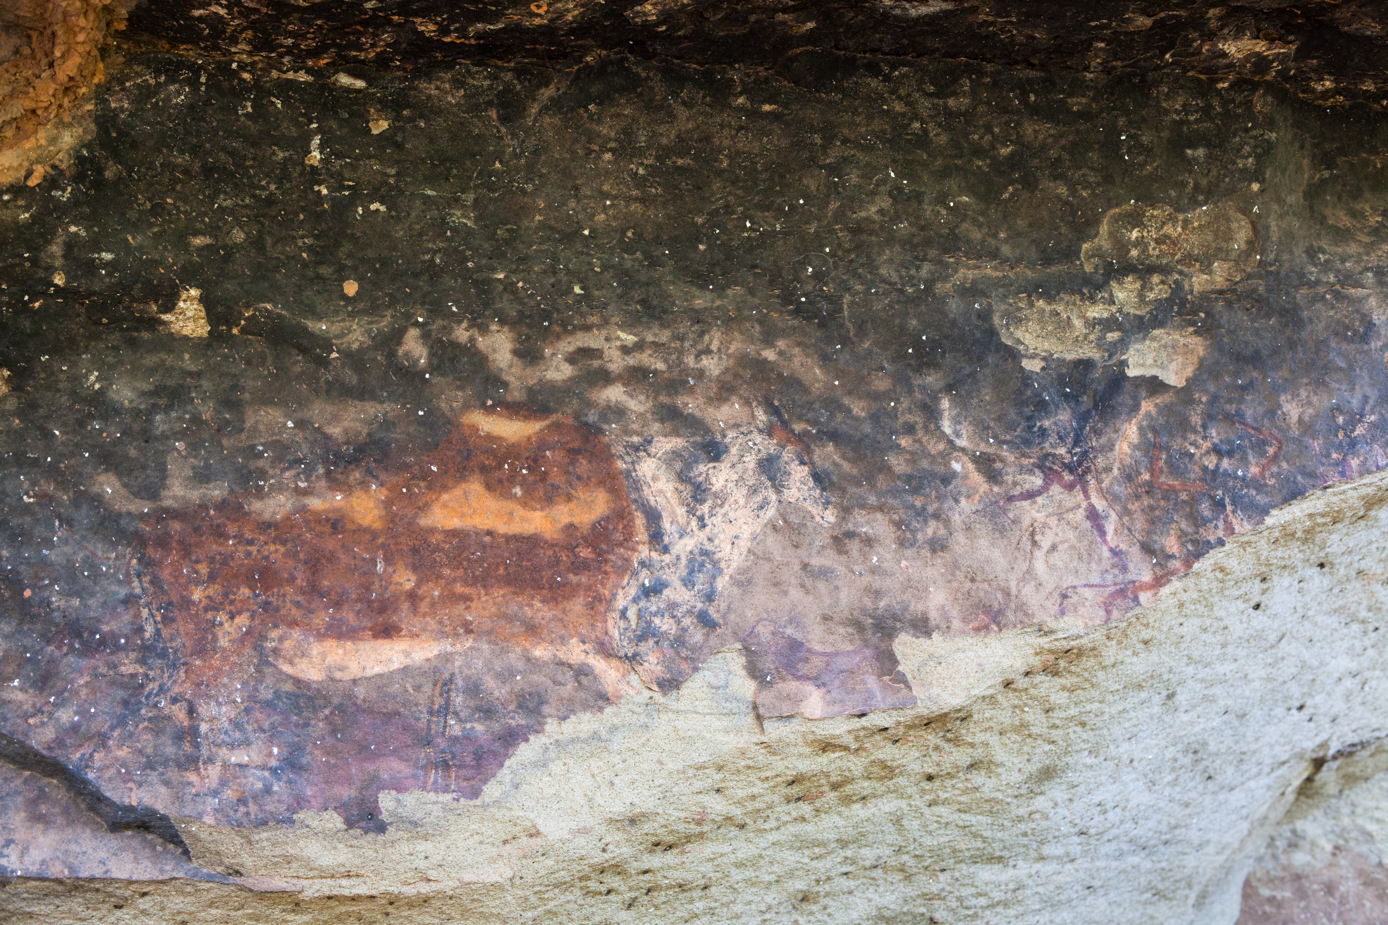 Encounter with an eland: eland on the left and hunting figures at the right. One of the central themes in southern African hunter-gatherer rock art is the meeting of hunters and one of the big meat animals, such as this eland